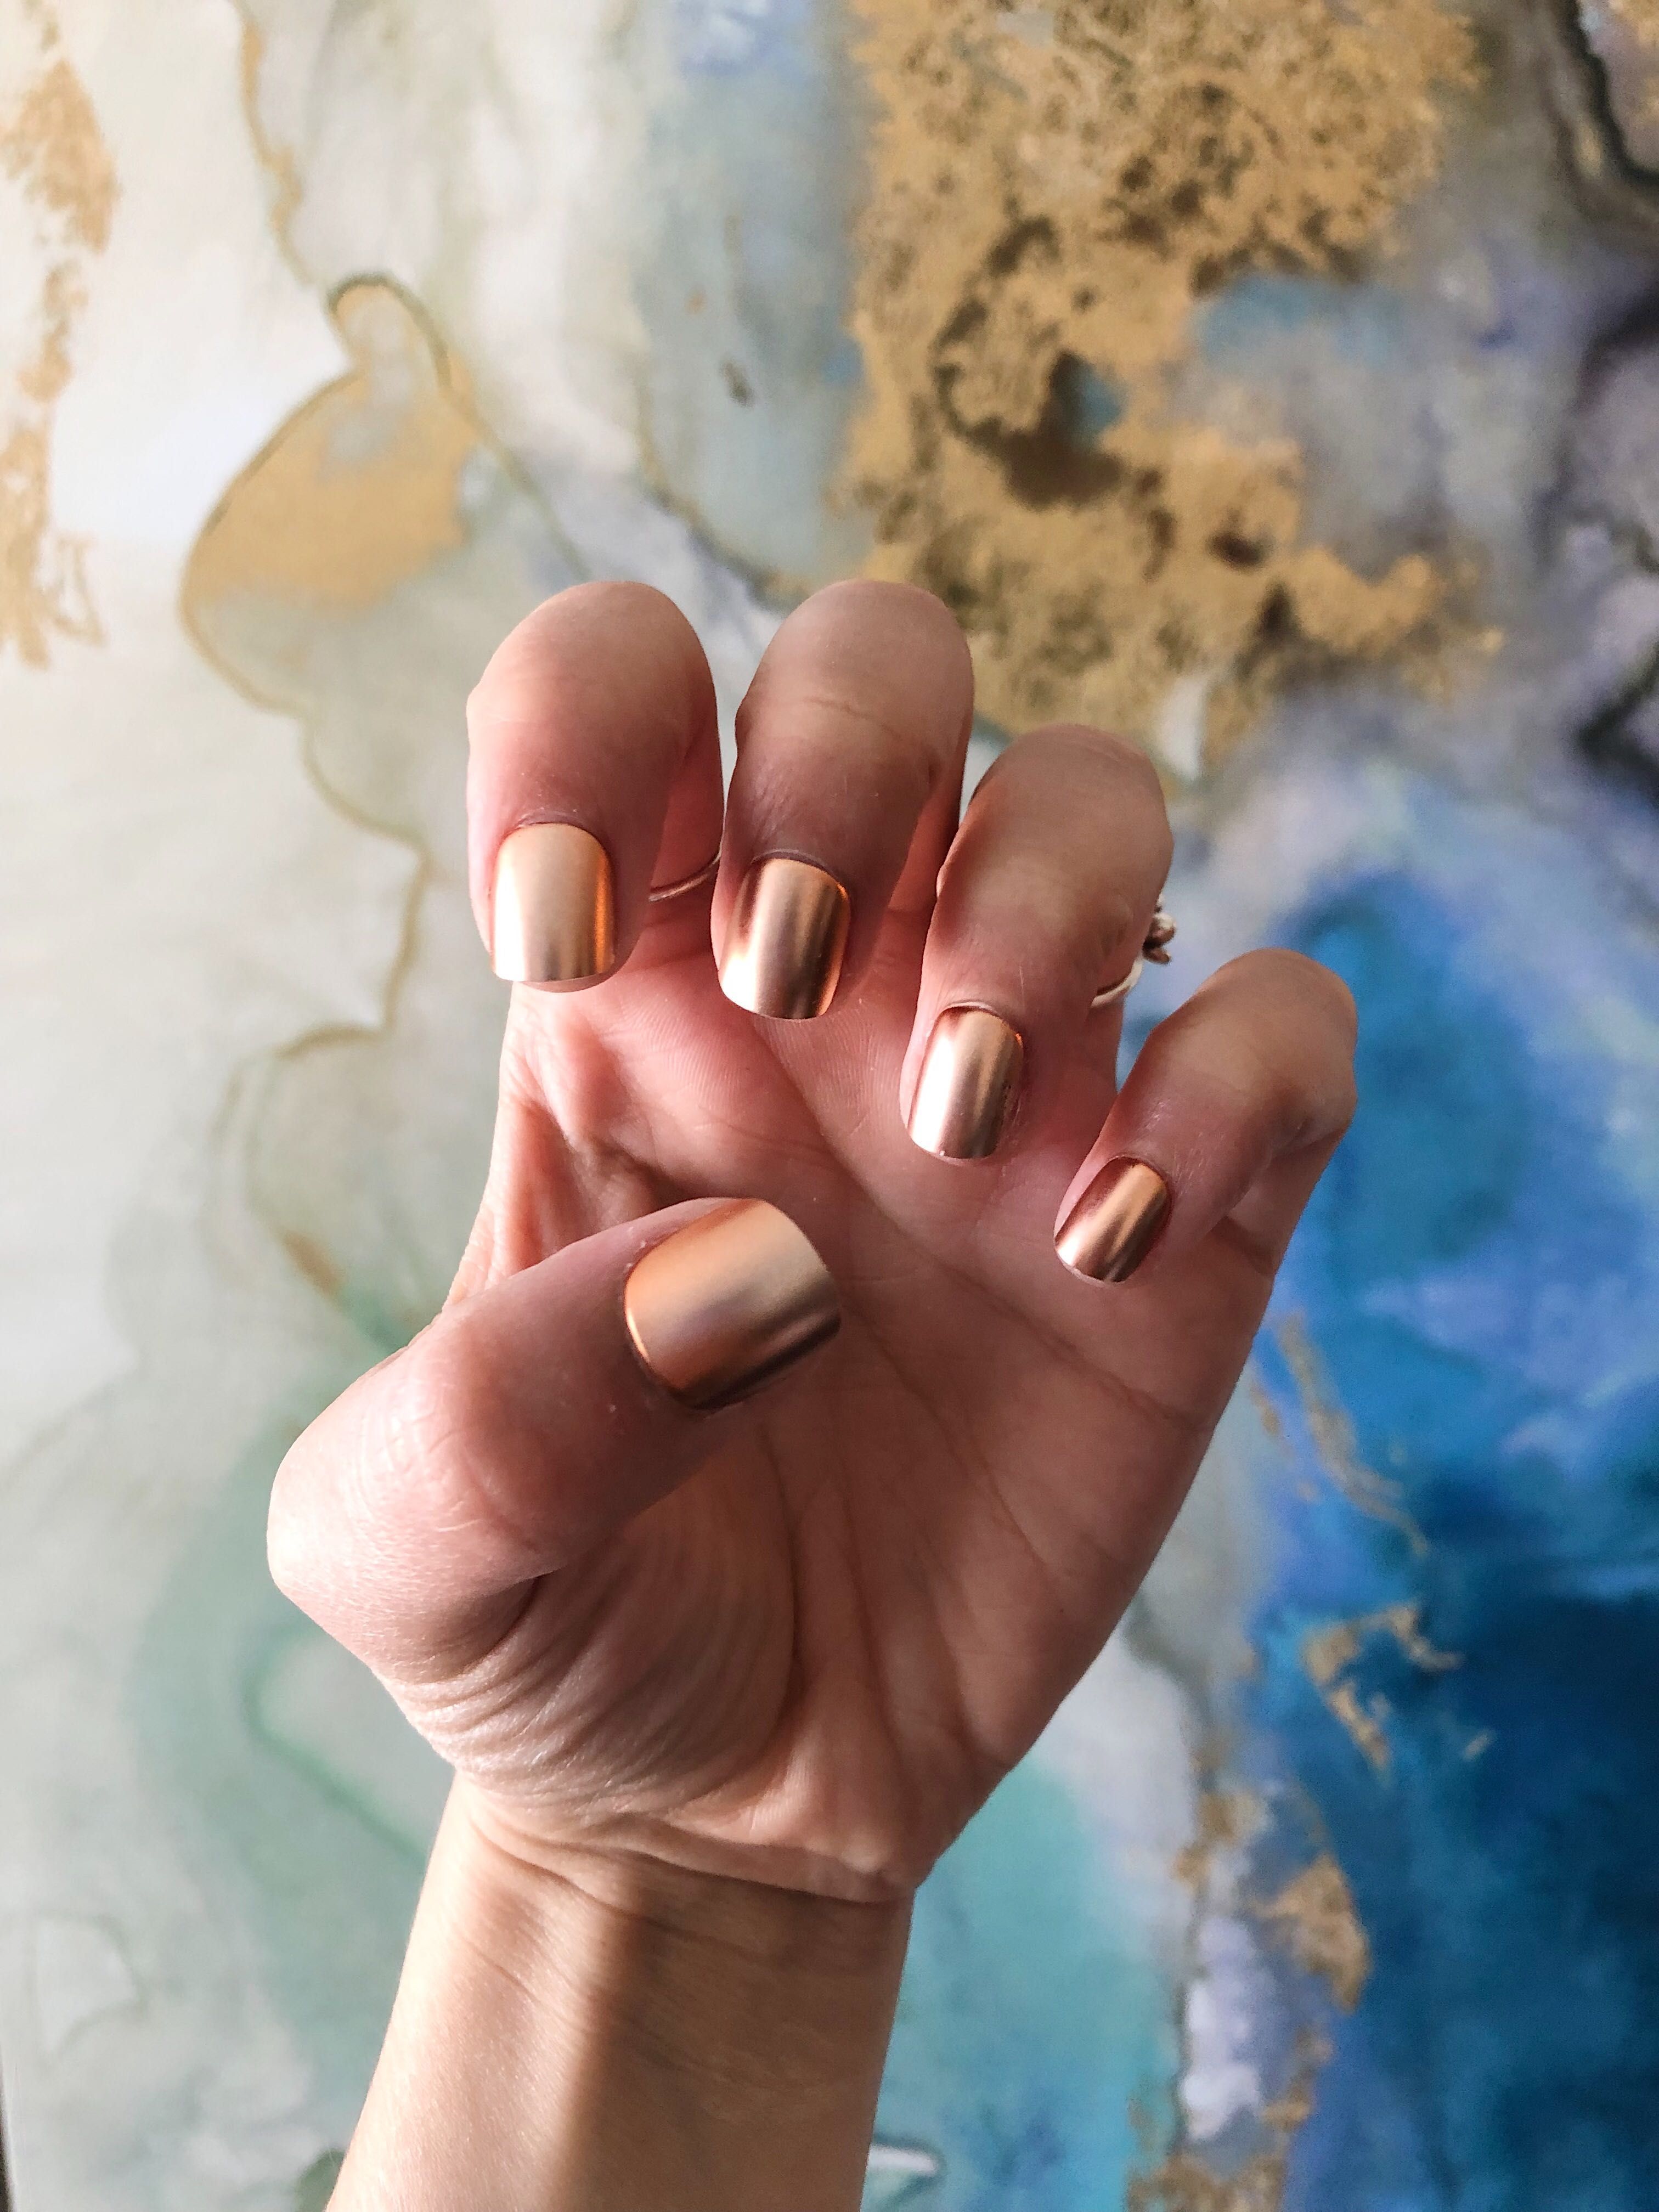 5 Best Press On Nails That Last For A Week Without Damage 2021